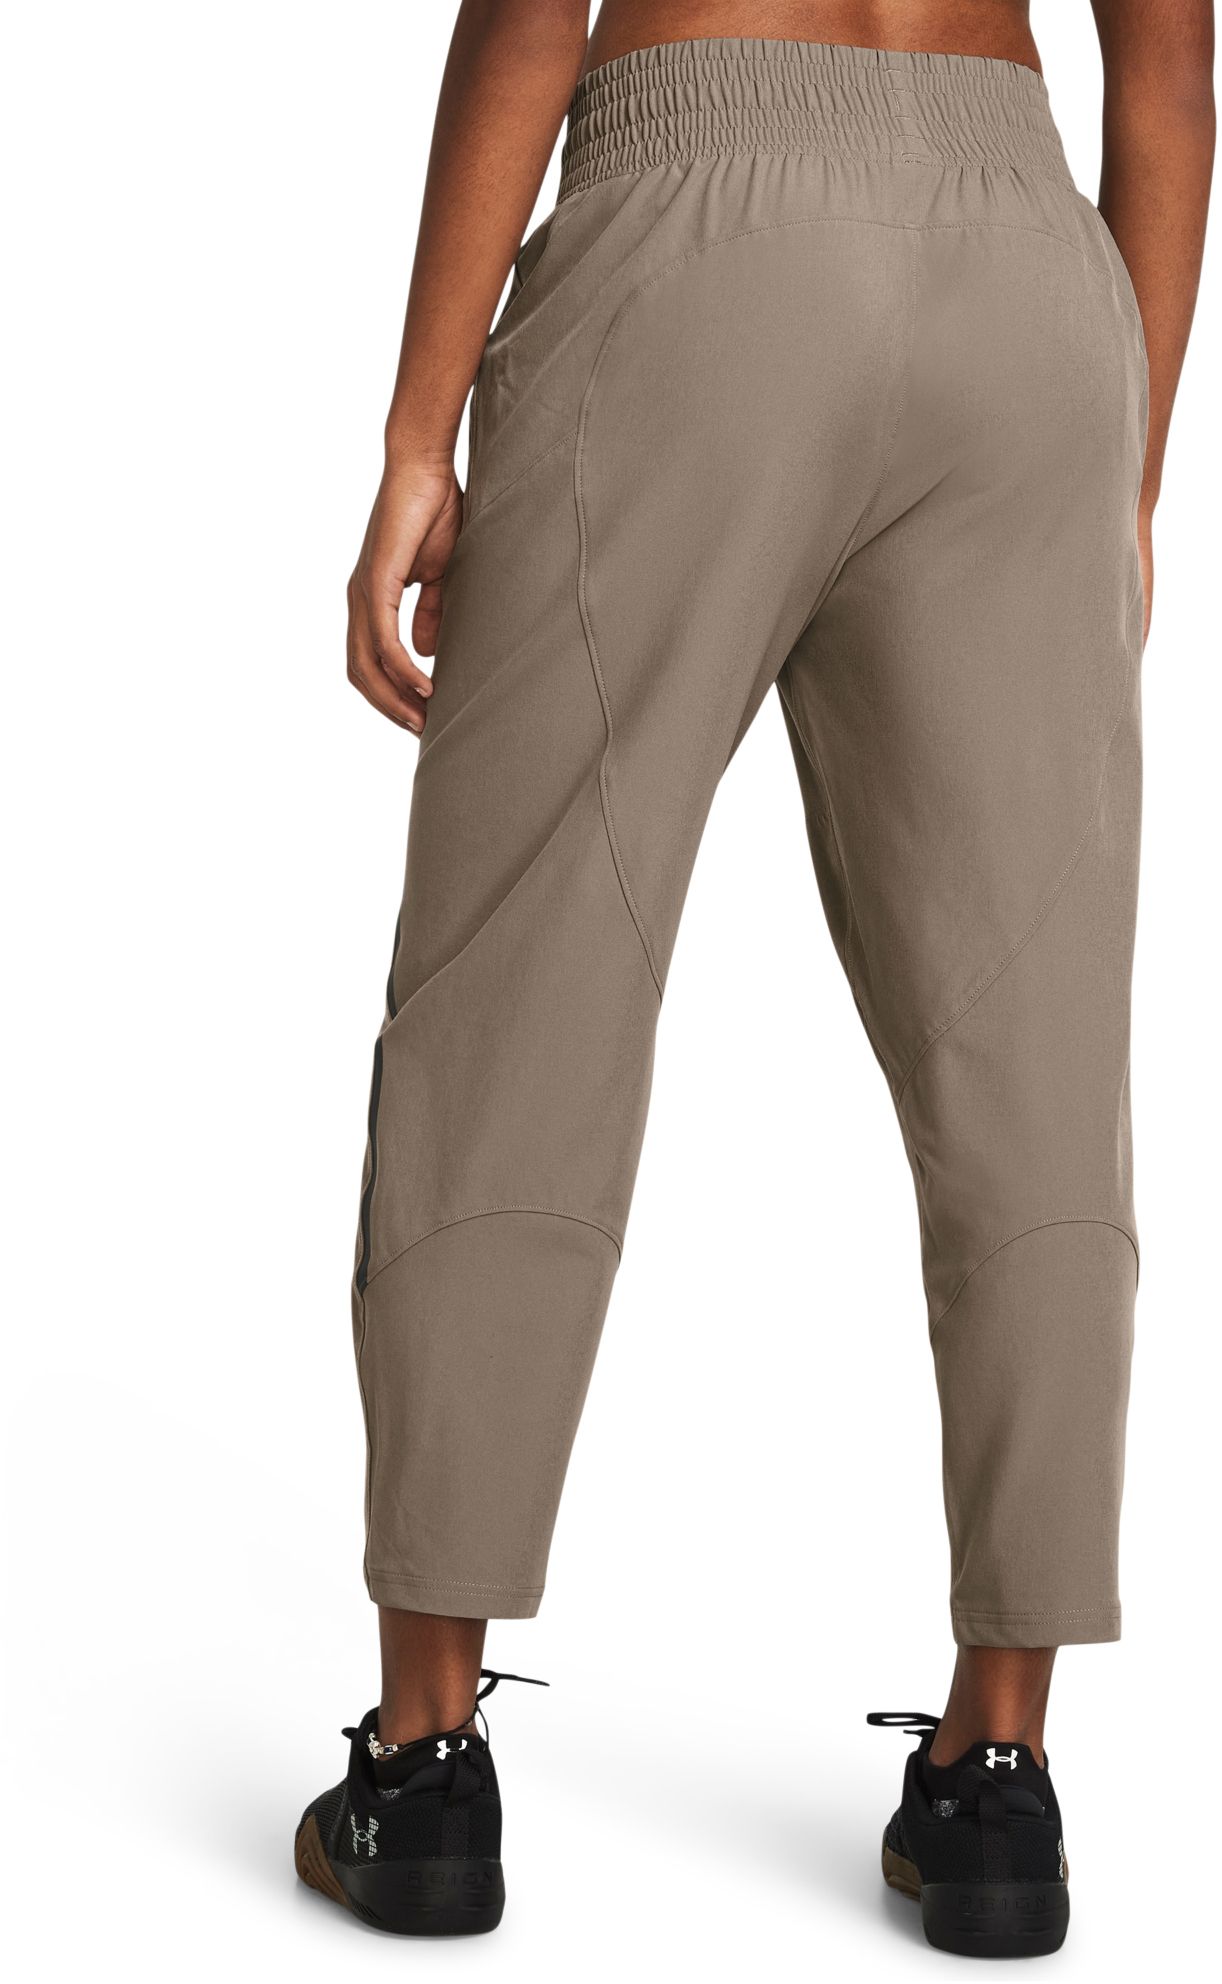 Dick's Sporting Goods Under Armour Women's Unstoppable Ankle Pants